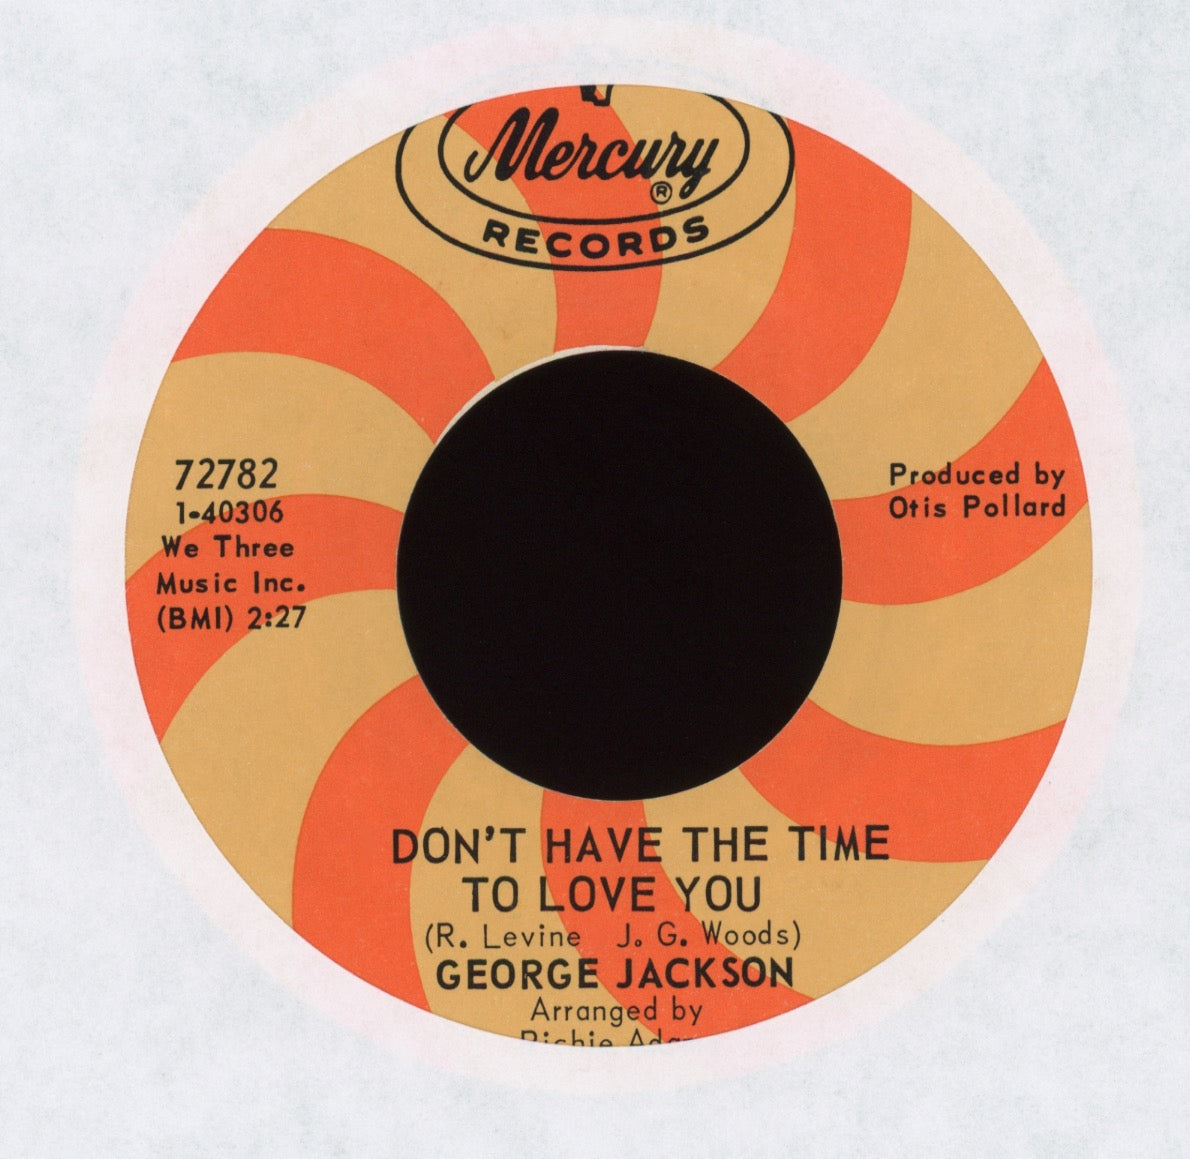 George Jackson - I Don't Have The Time To Love You on Mercury